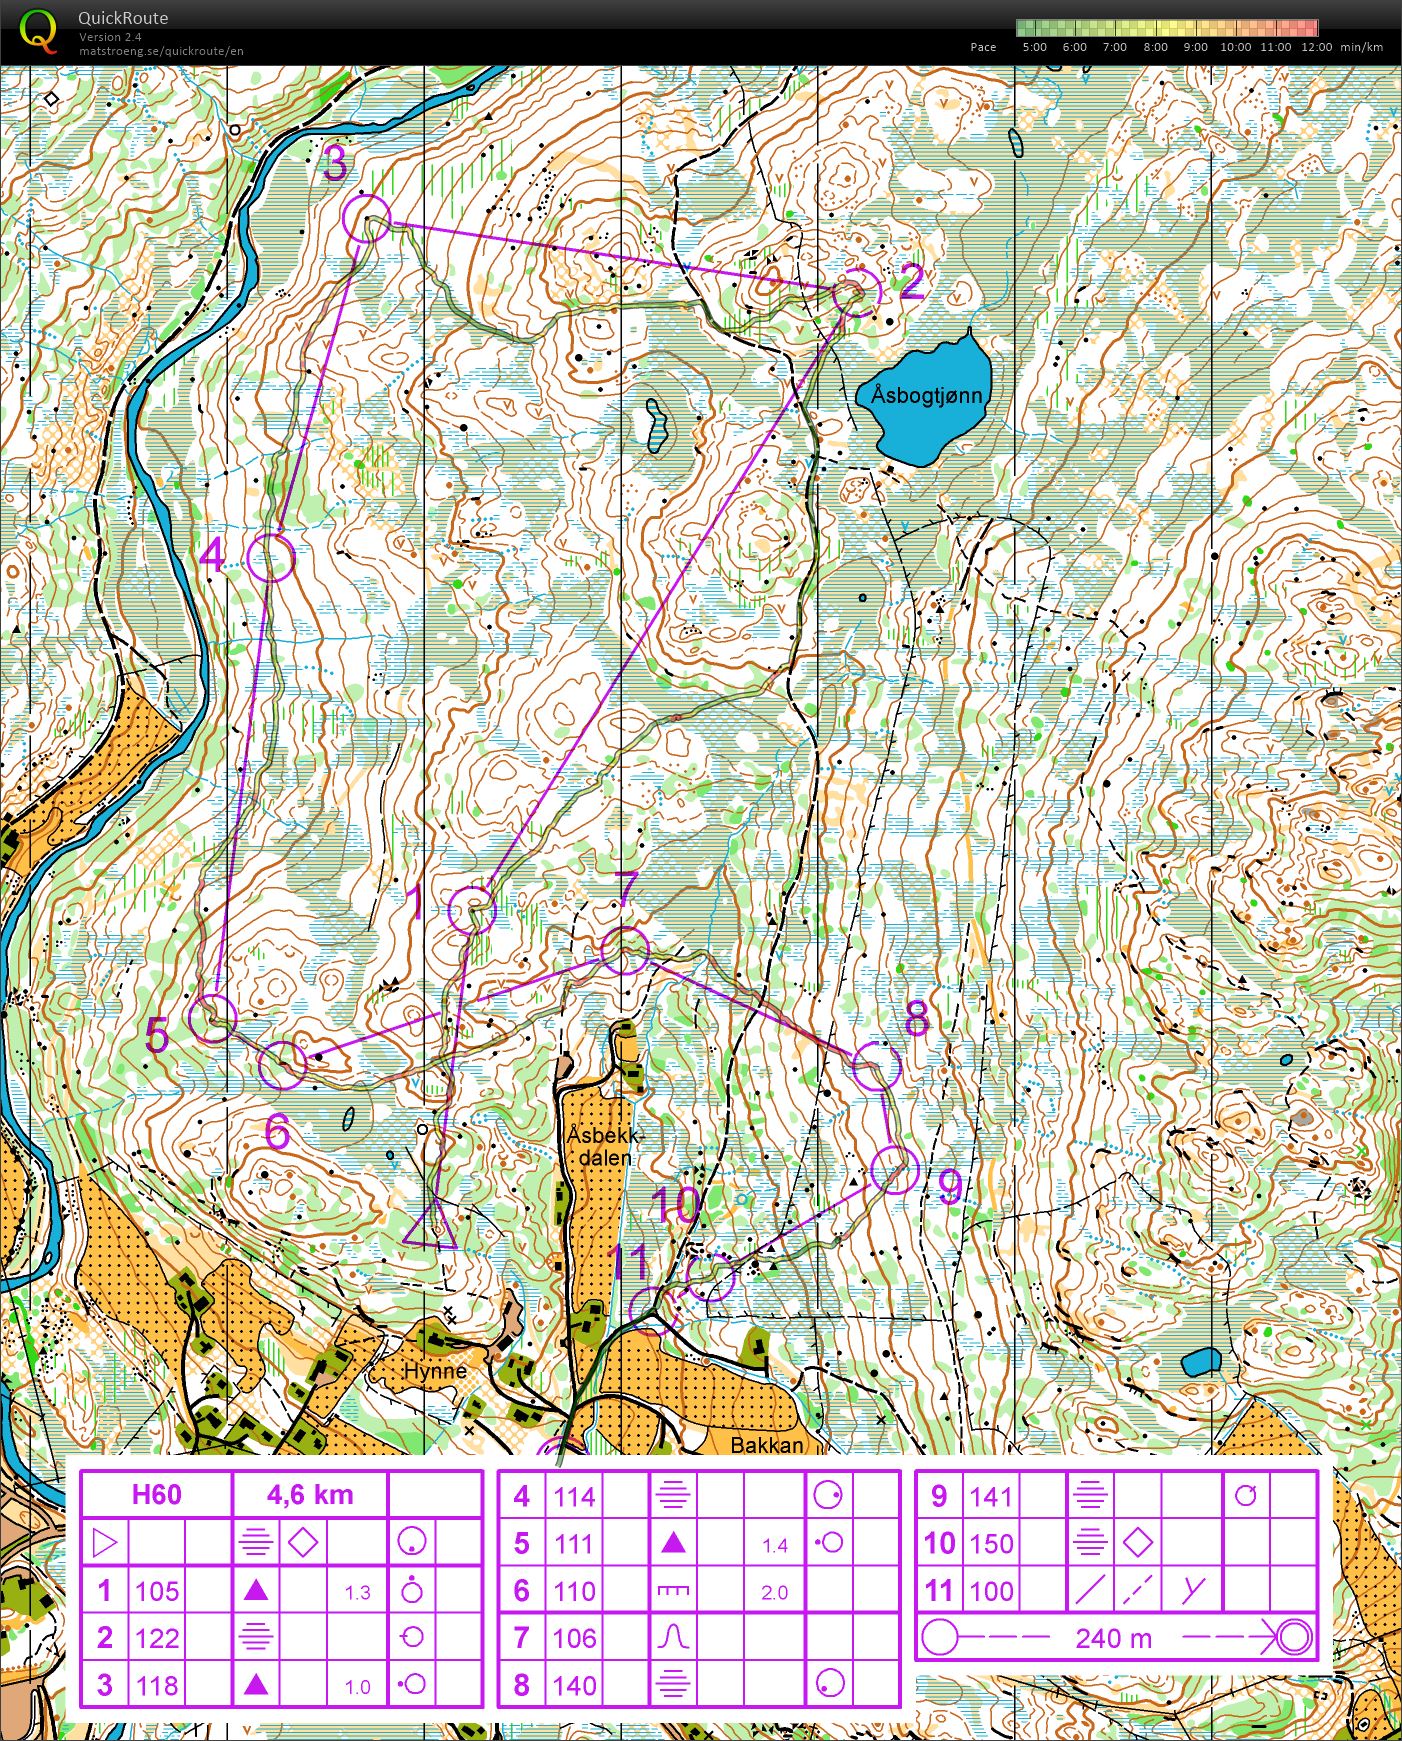 Re-run of H60 Long course from VM in Rauland (2017-10-12)